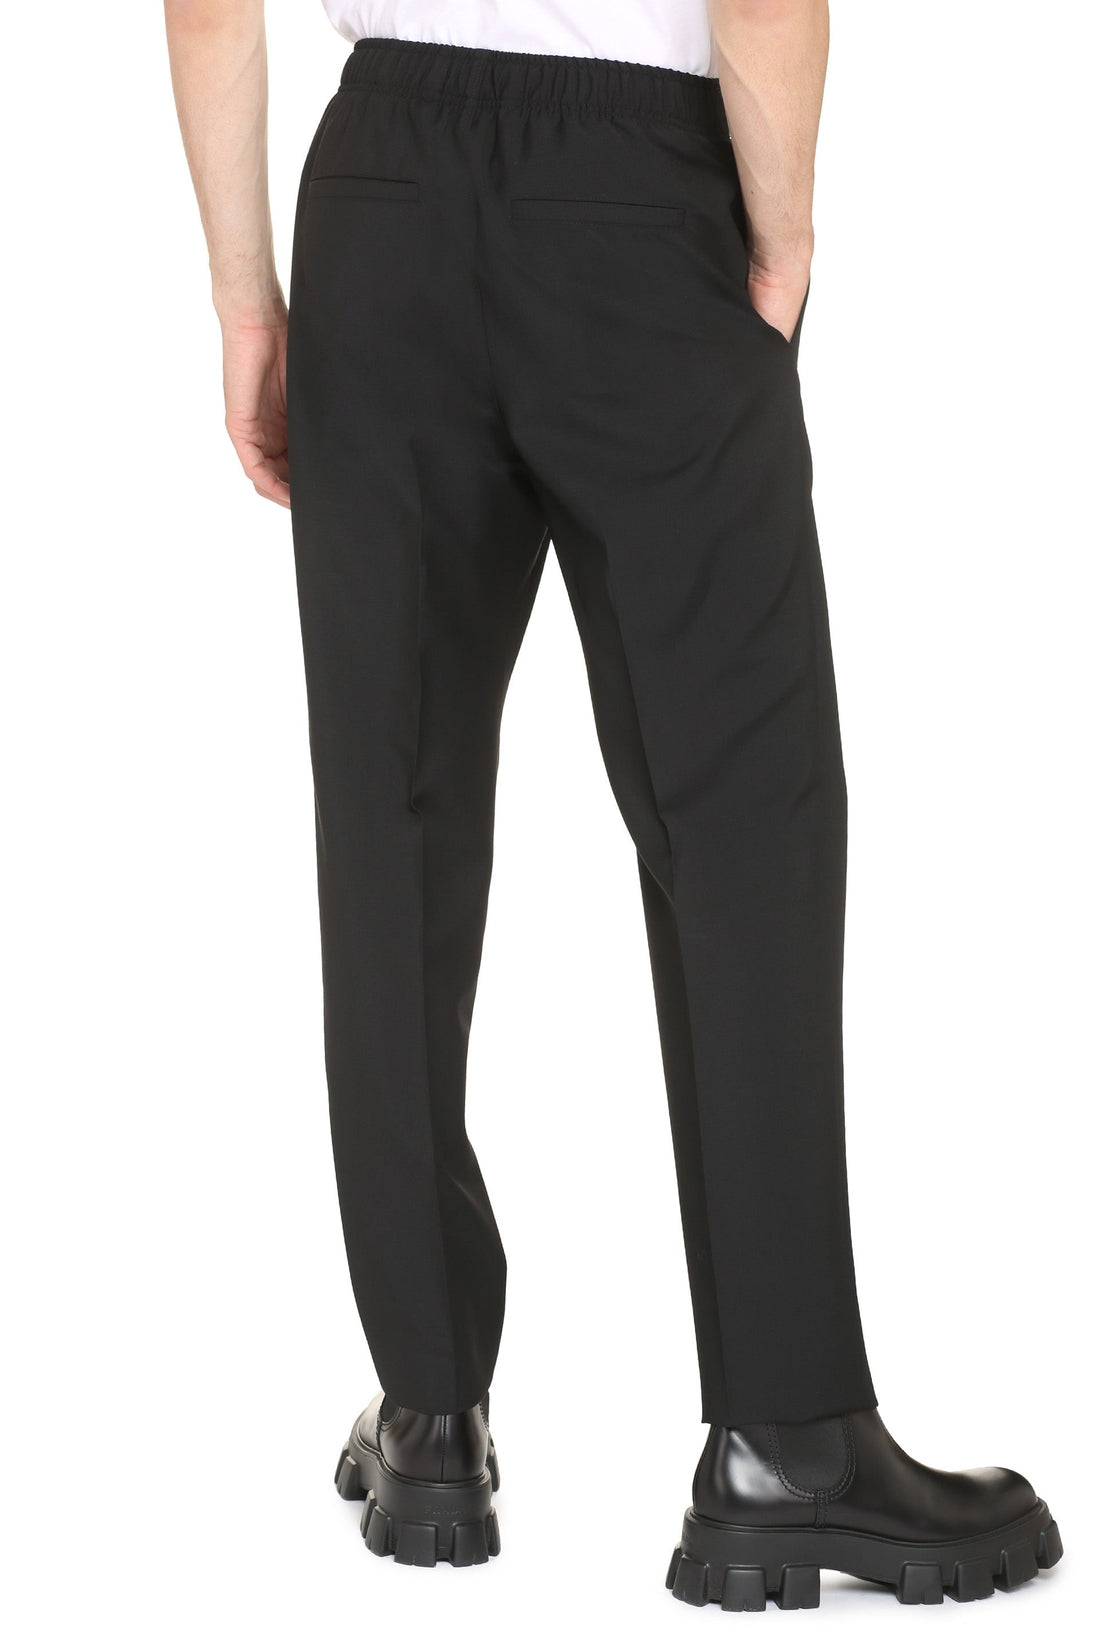 Givenchy-OUTLET-SALE-Tailored wool trousers-ARCHIVIST